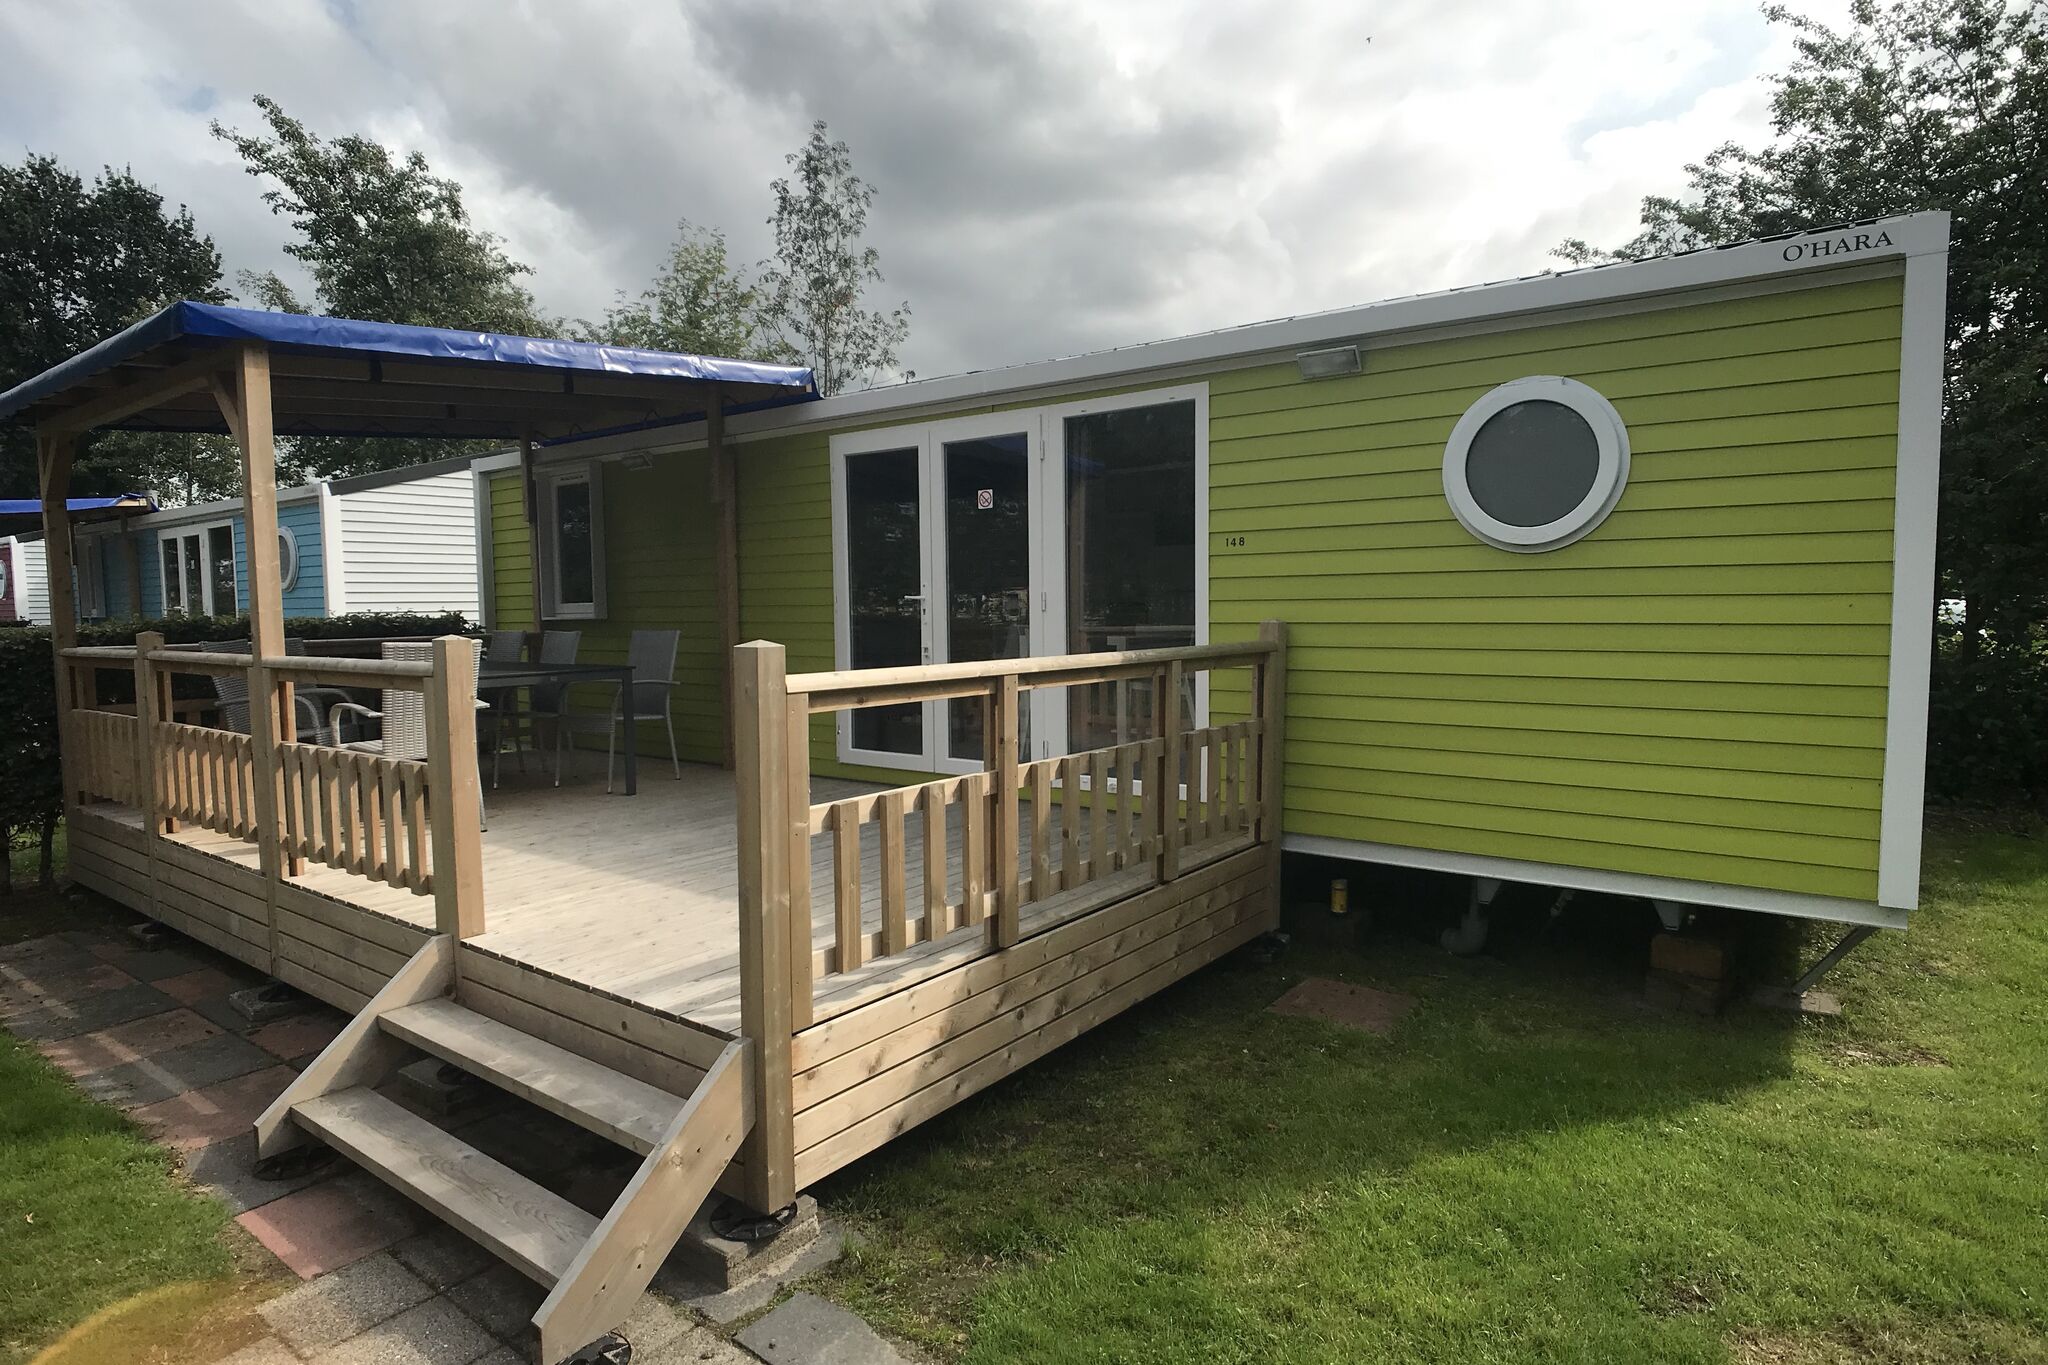 Colorful chalet with veranda, located in Friesland